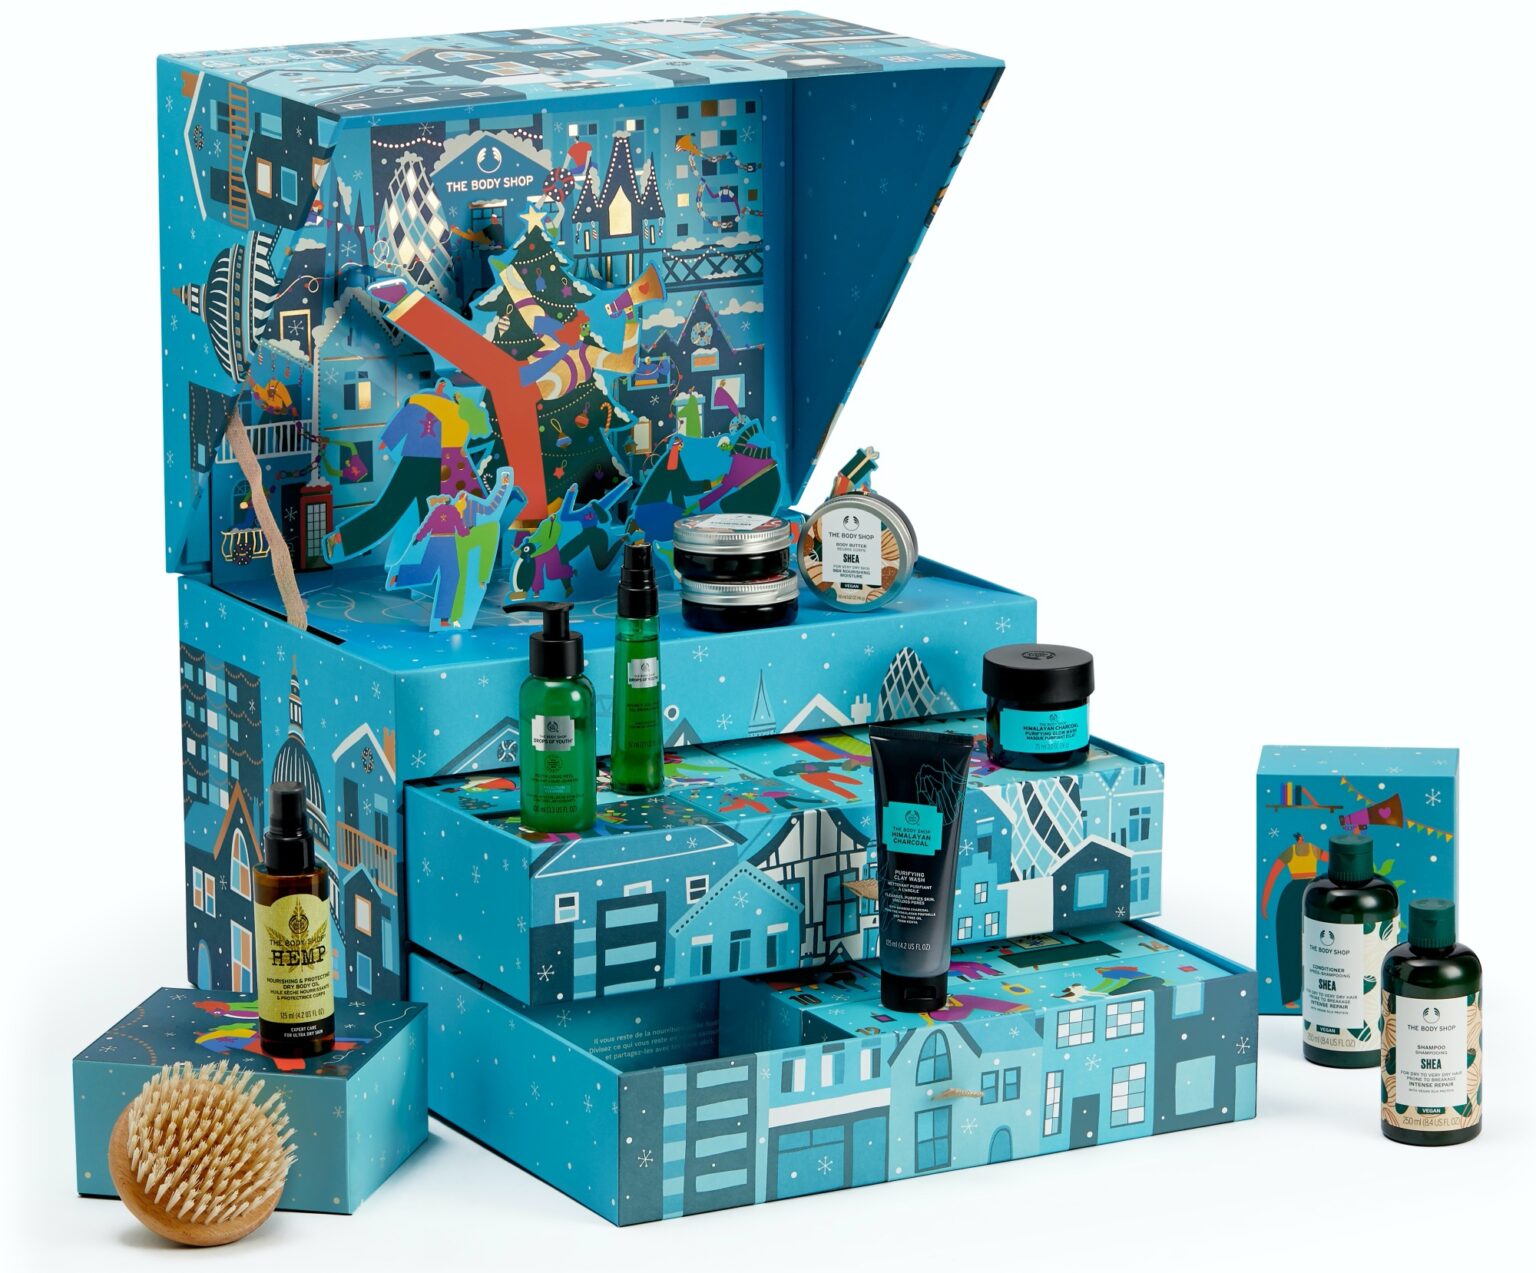 The Body Shop Exclusive Limited Edition Advent Calendar 2021 Contents